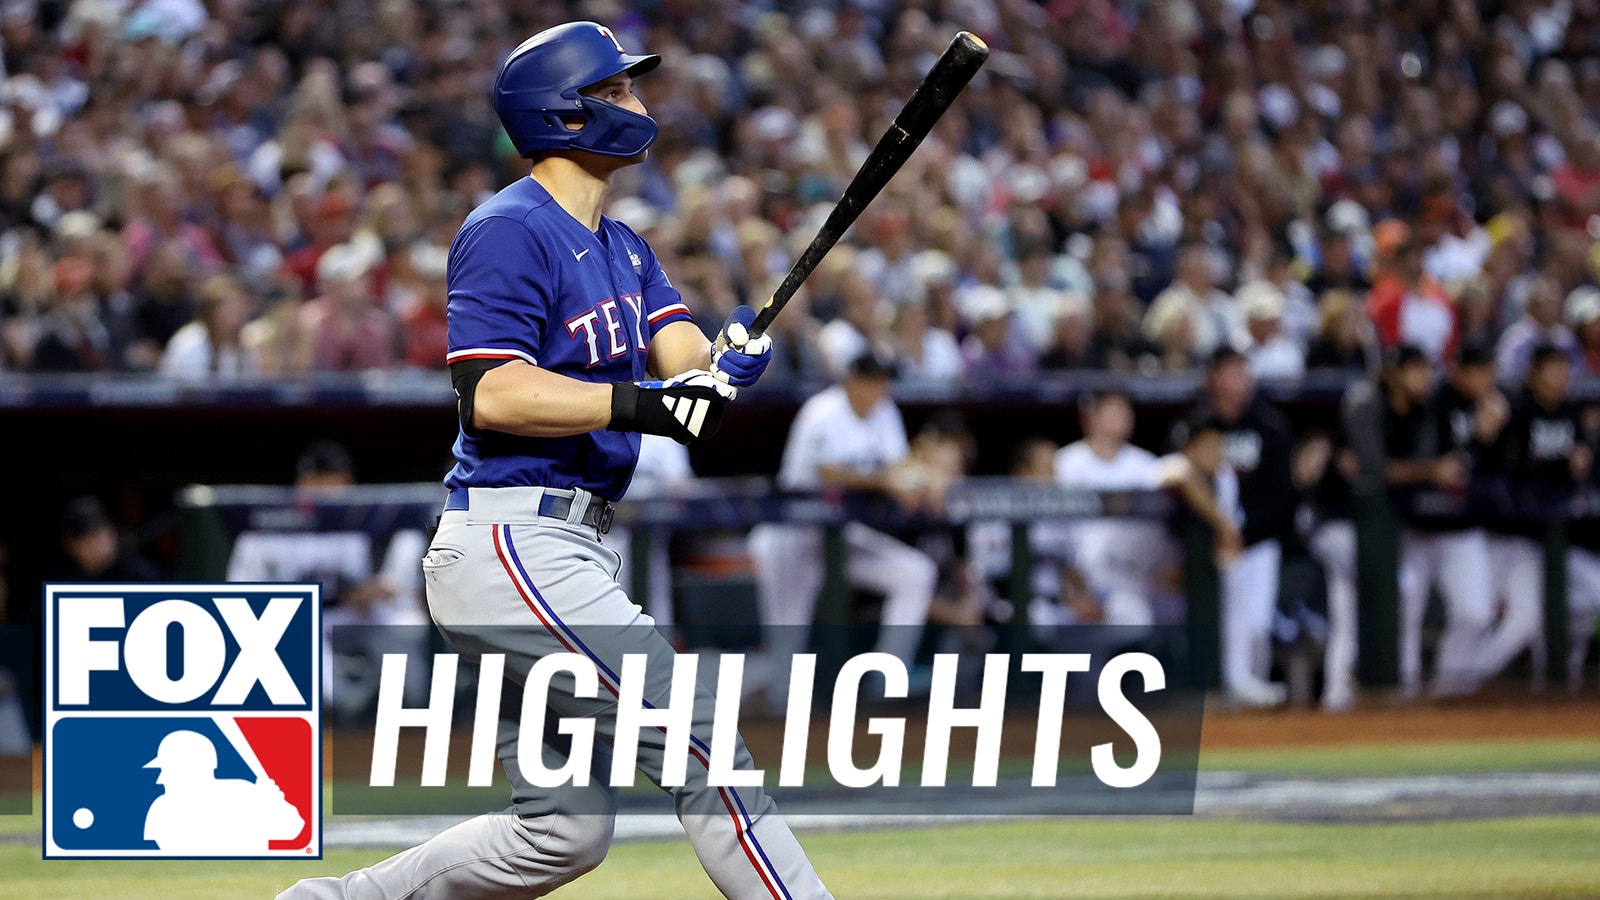 Rangers' Corey Seager CRUSHES a two-run homer to take a 3-0 lead over Diamondbacks